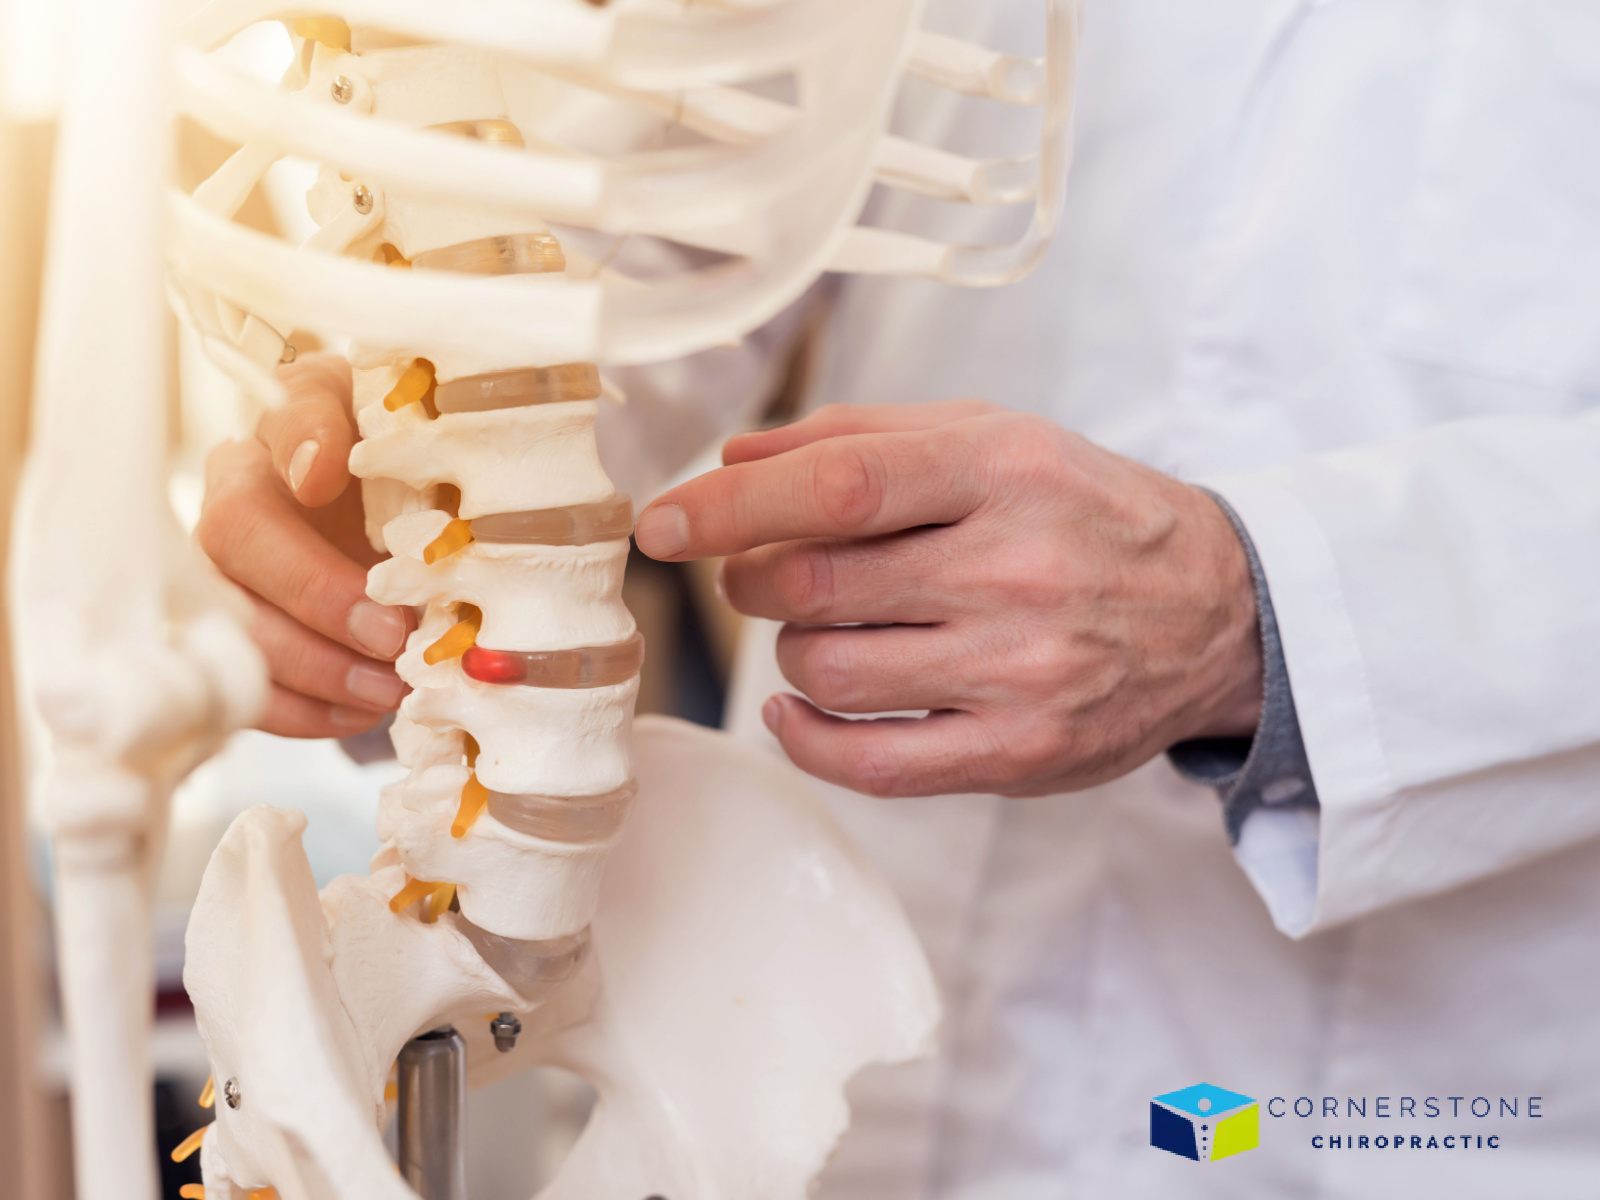 Best Rated Chiropractor Near Maltby, WA